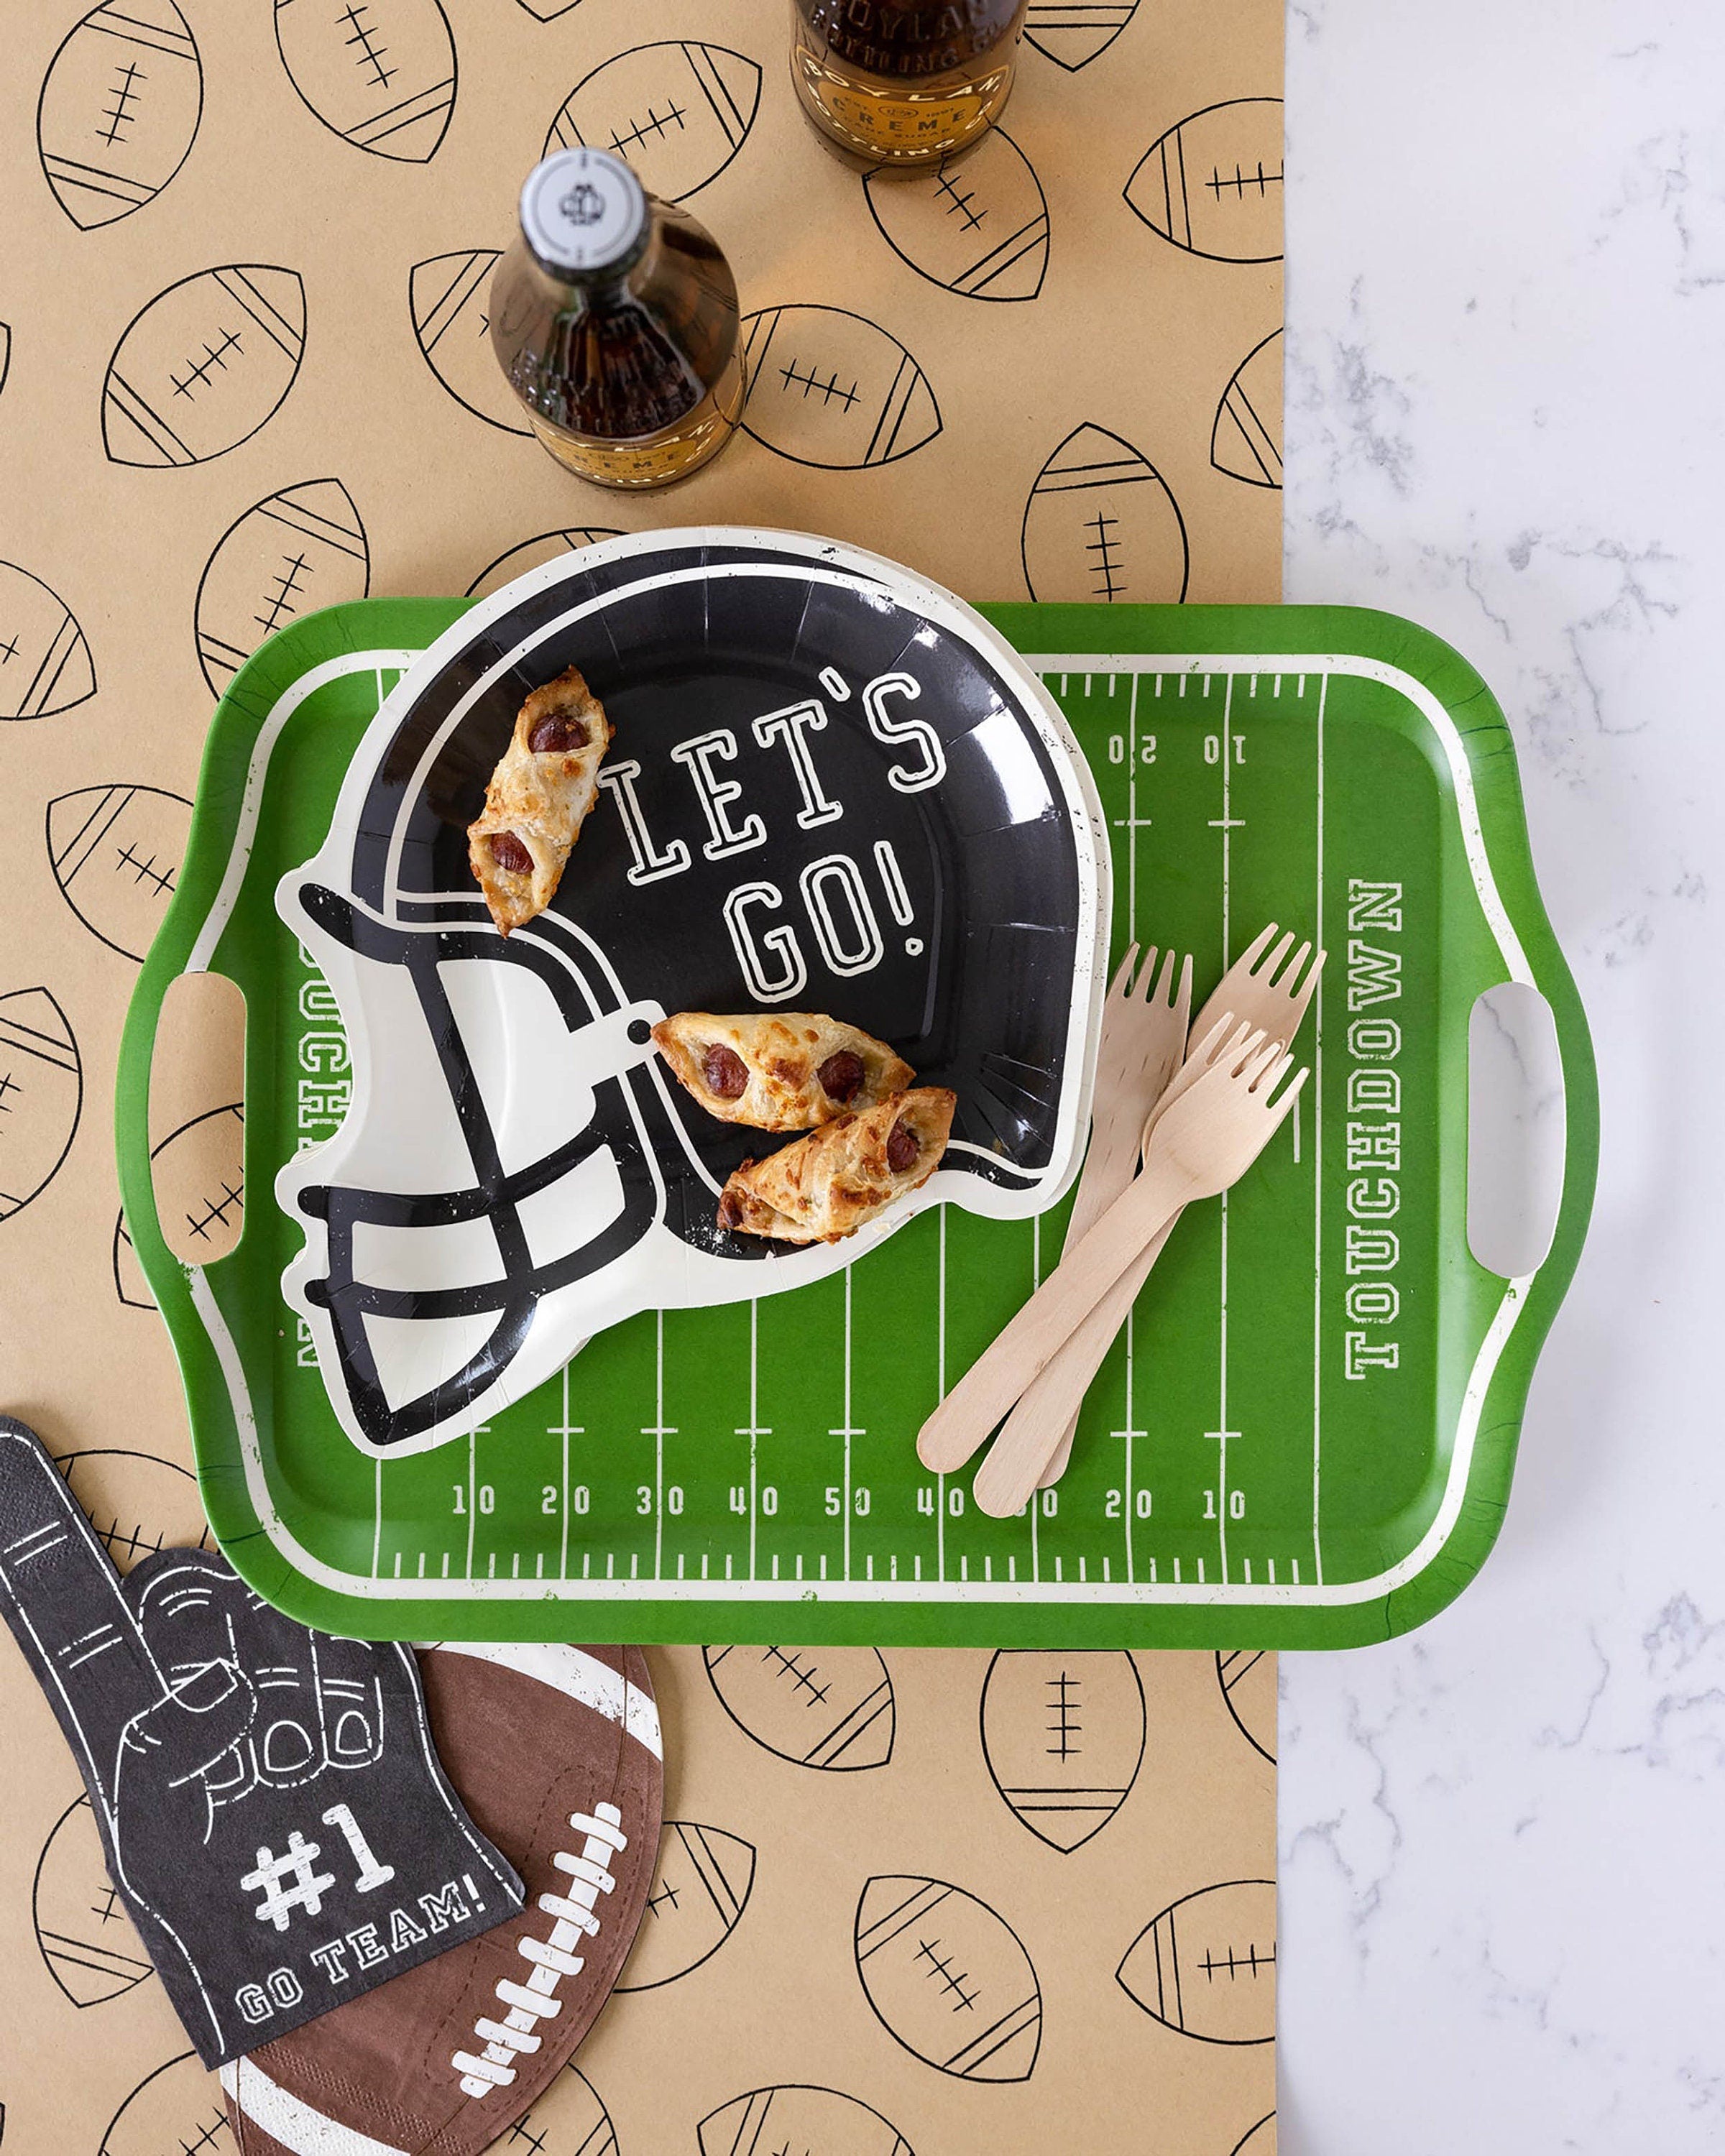 Football Napkins - Football Party - Football Birthday Party - Football Theme Party - Football Party Supplies - Tailgate Party - NFL Party